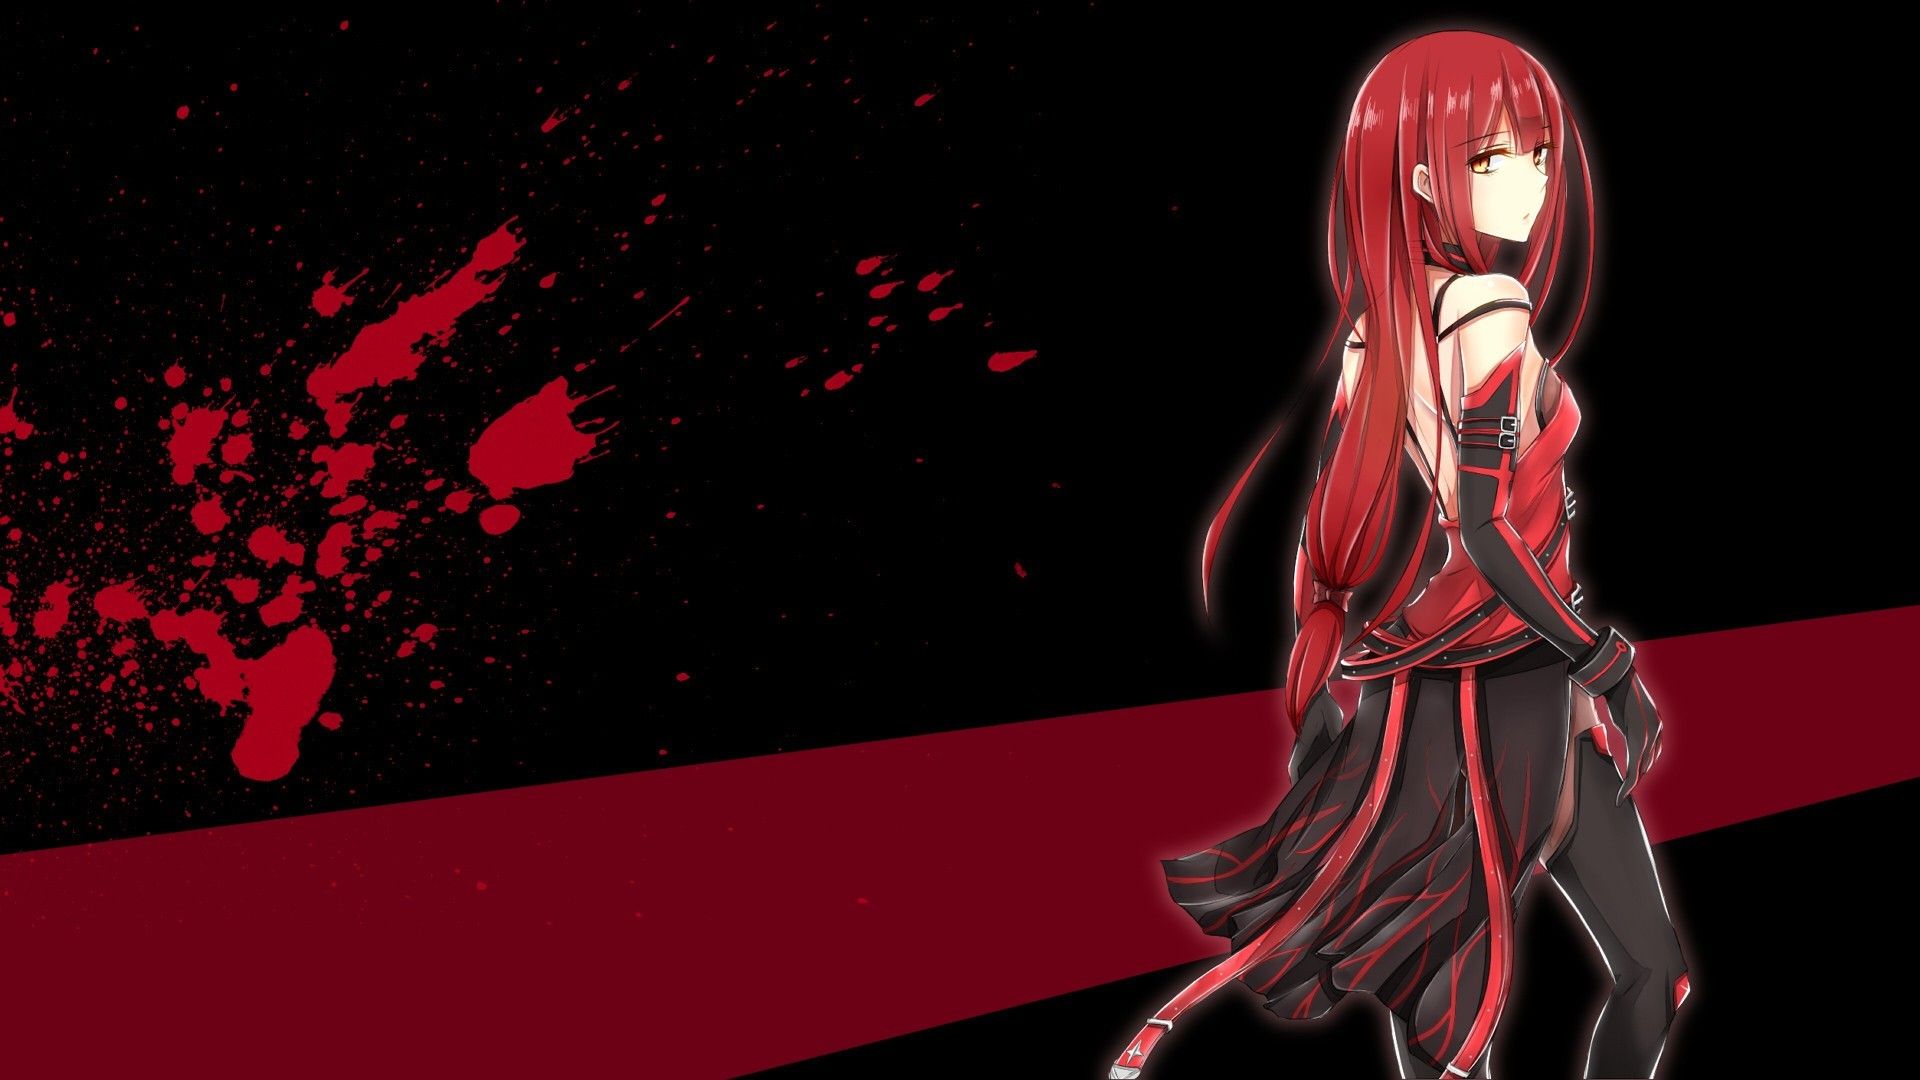 Dark Anime Red Dress Wallpapers - Wallpaper Cave